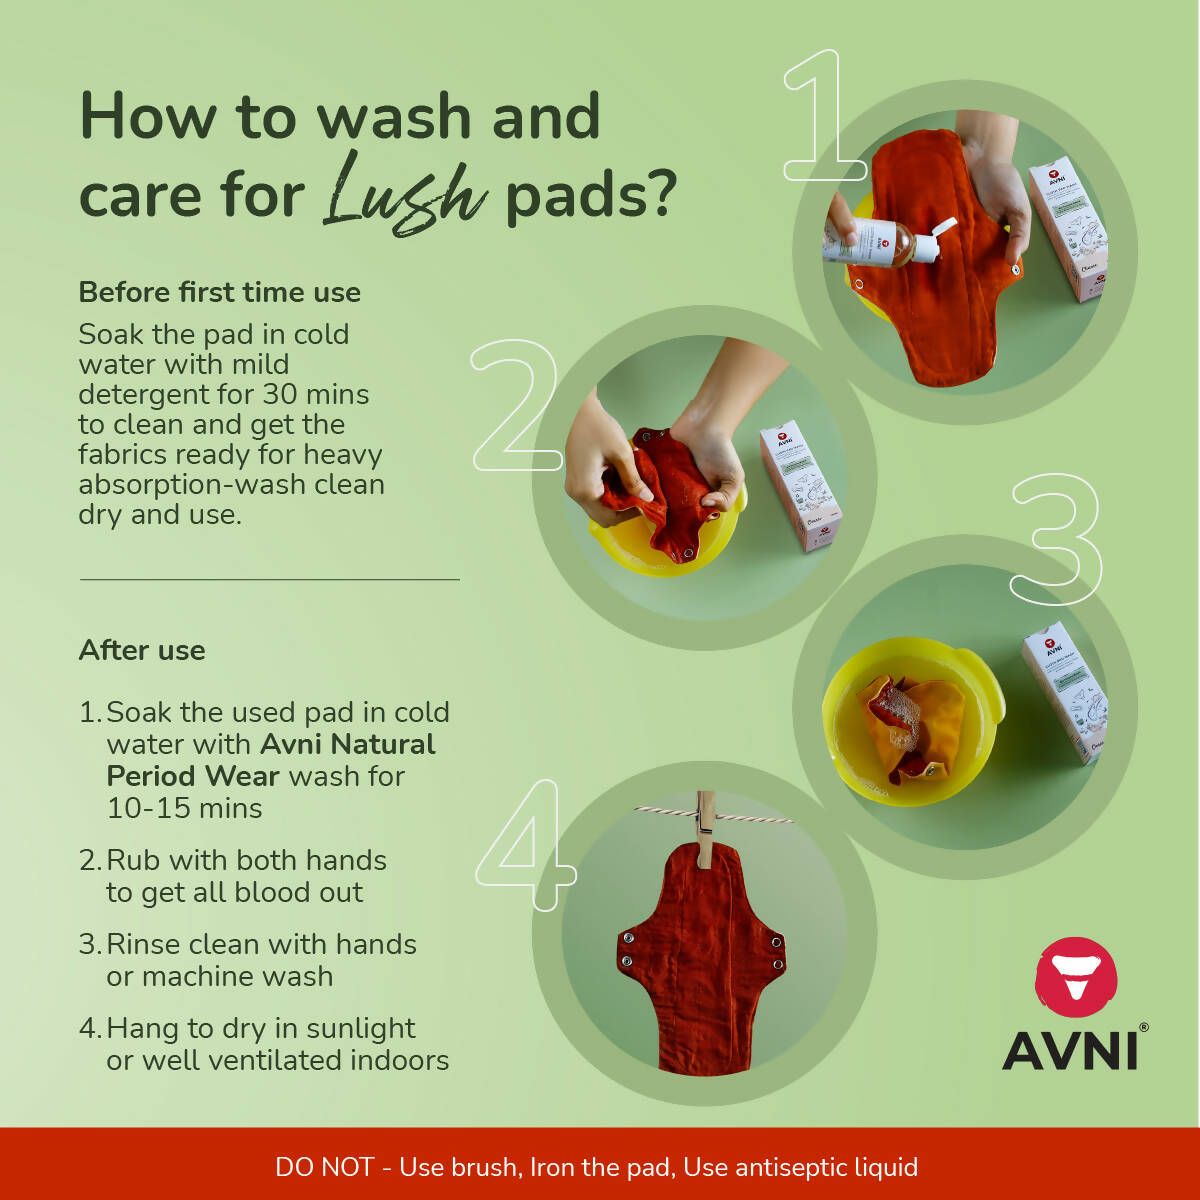 Avni Lush Certified 100% Organic Cotton Washable Cloth Pads, 3 L + 1 XL (3 X 280MM + 1 X 330MM, Pack of 4) + Avni Plant Based Liquid Detergent, Period/Inner Wear Wash- 100ml (Combo Pack of 5) Wemy Store